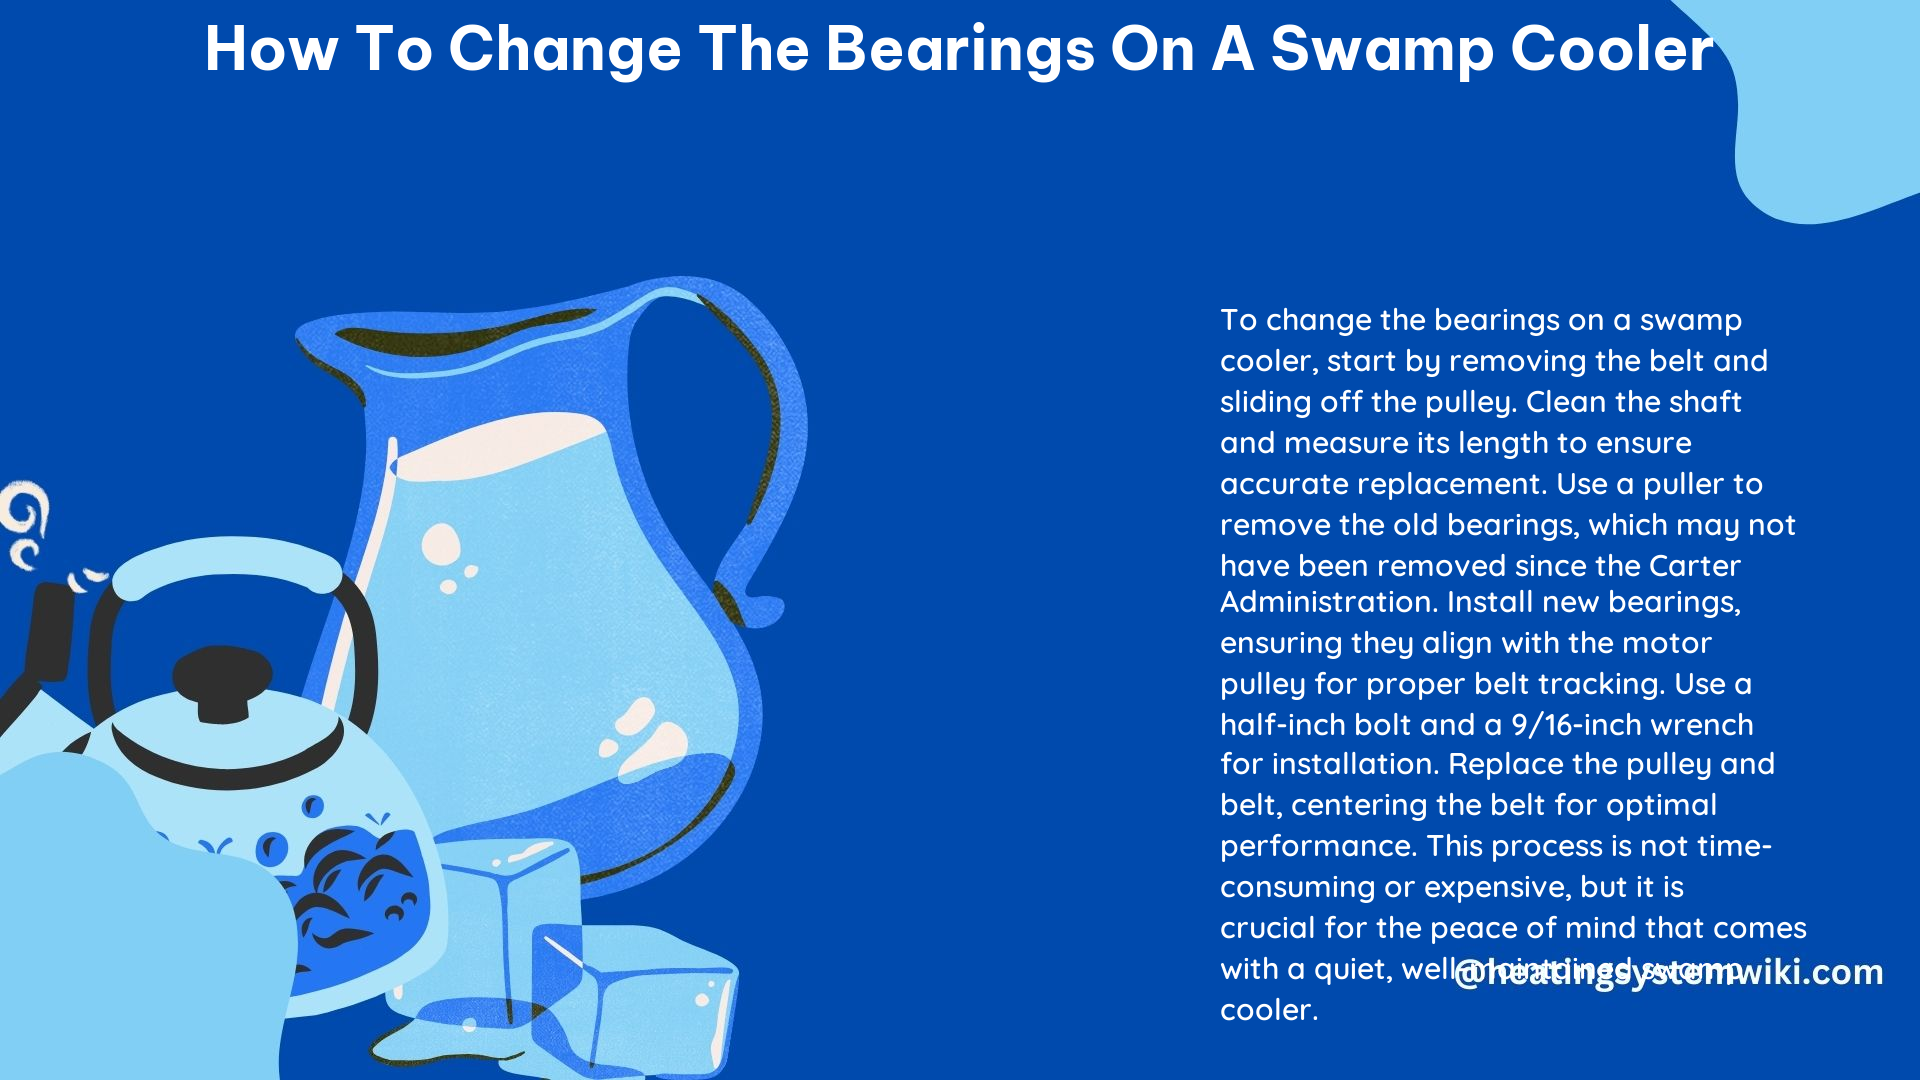 How to Change the Bearings on a Swamp Cooler